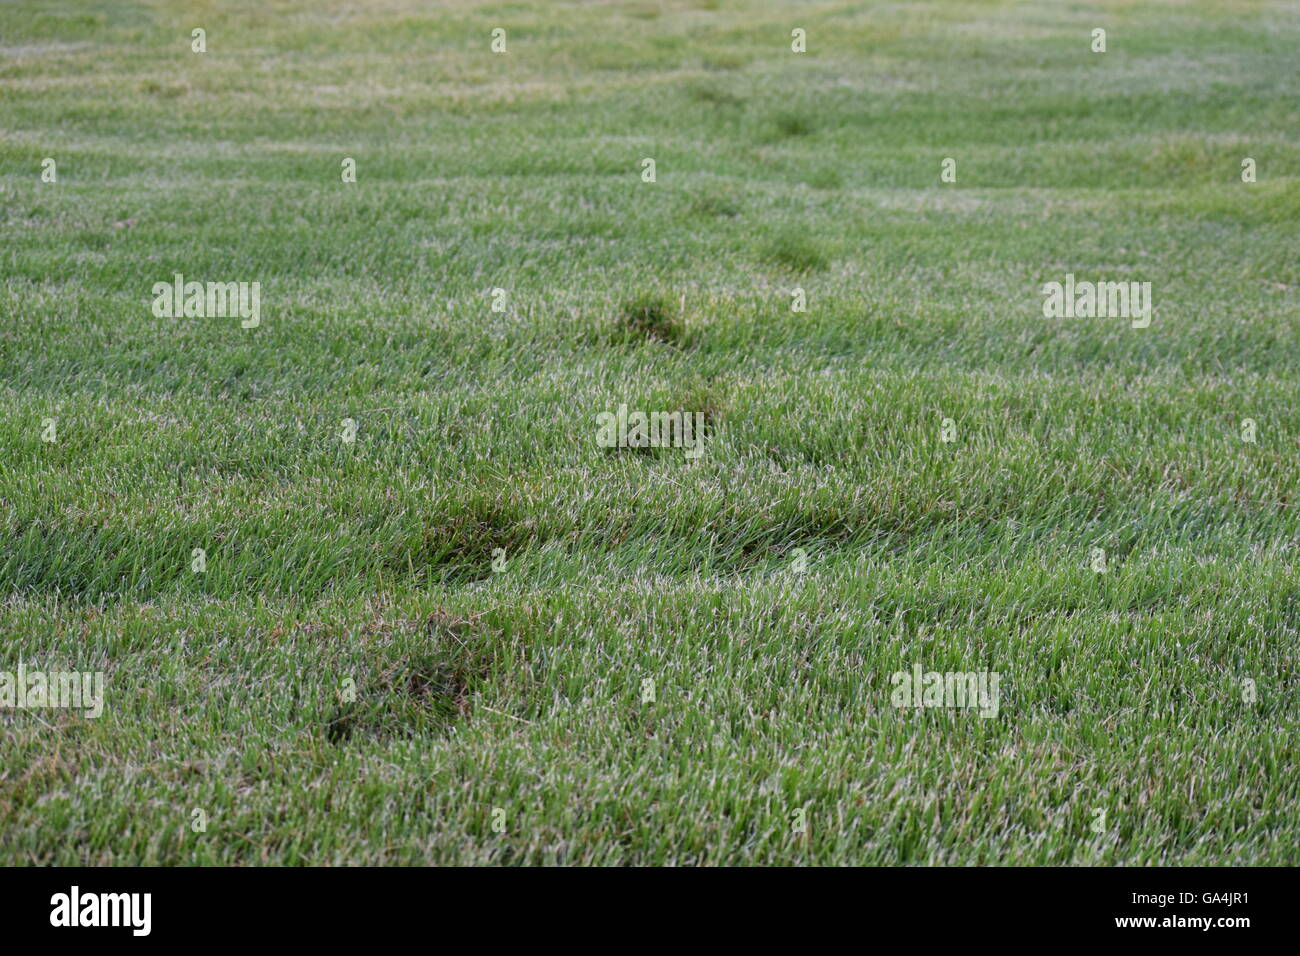 Footprints in grass Stock Photo